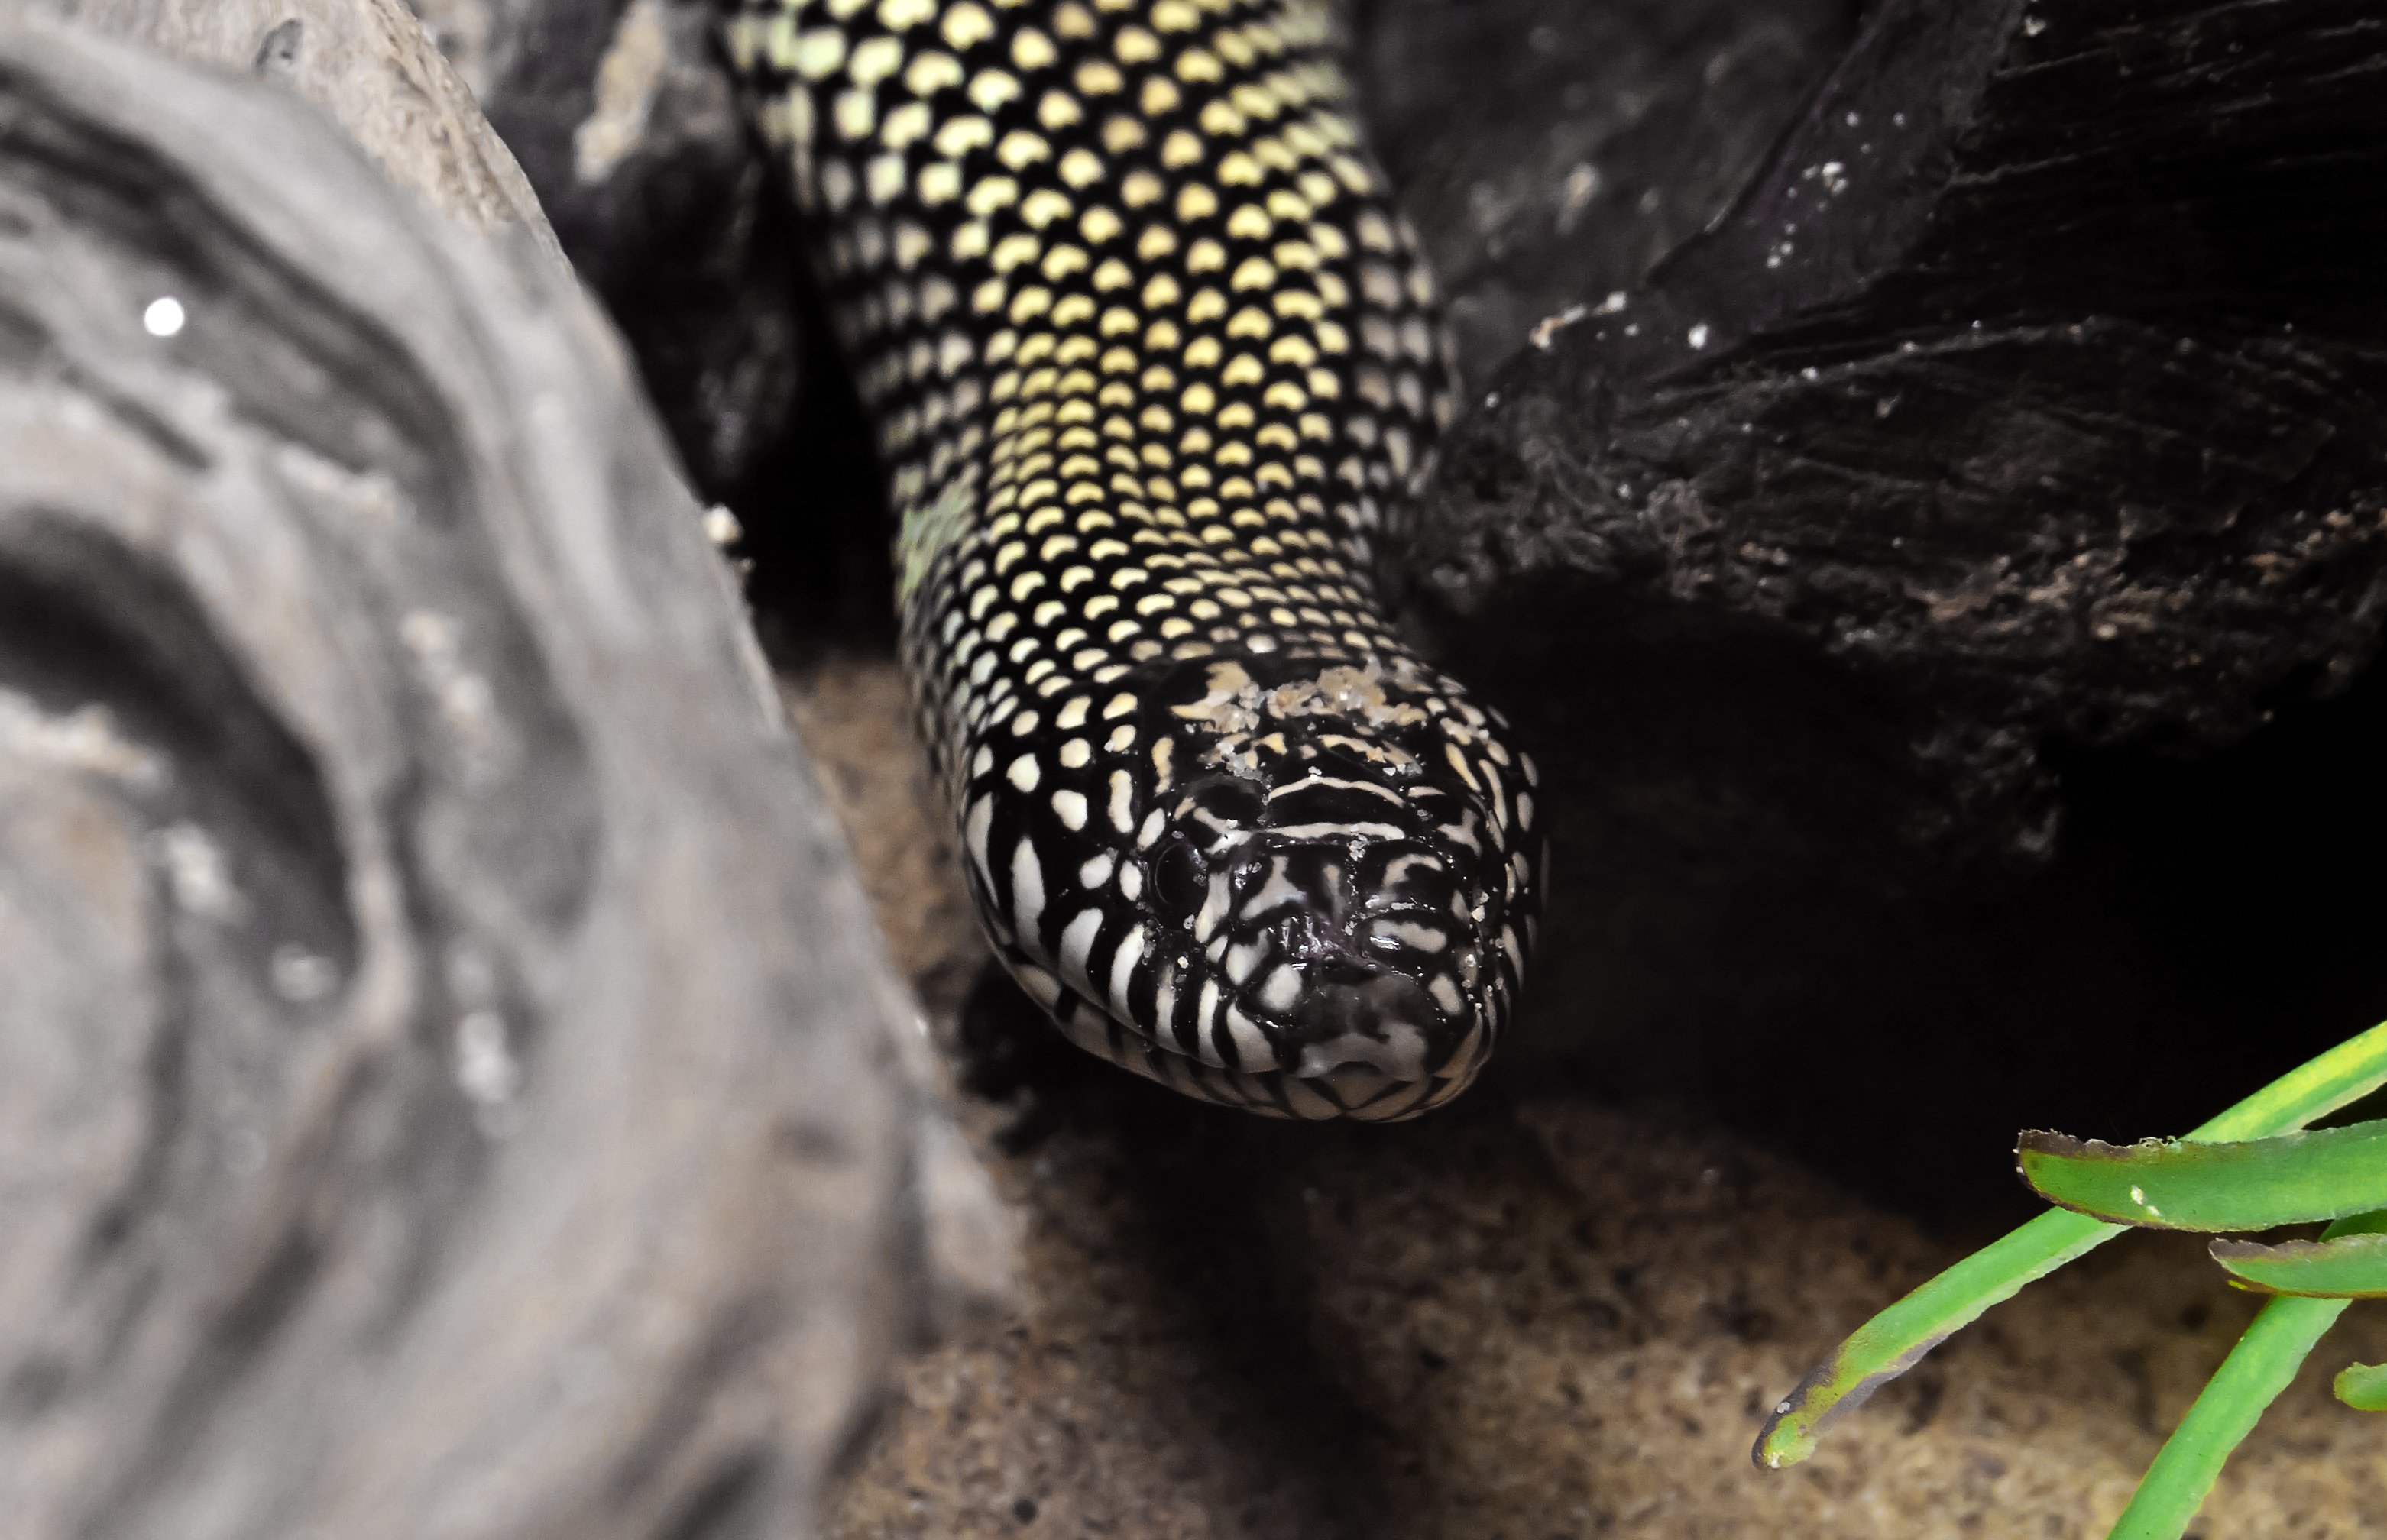 Close-up of a Desert Kingsnake in a nature-like environment | Photo: Shutterstock